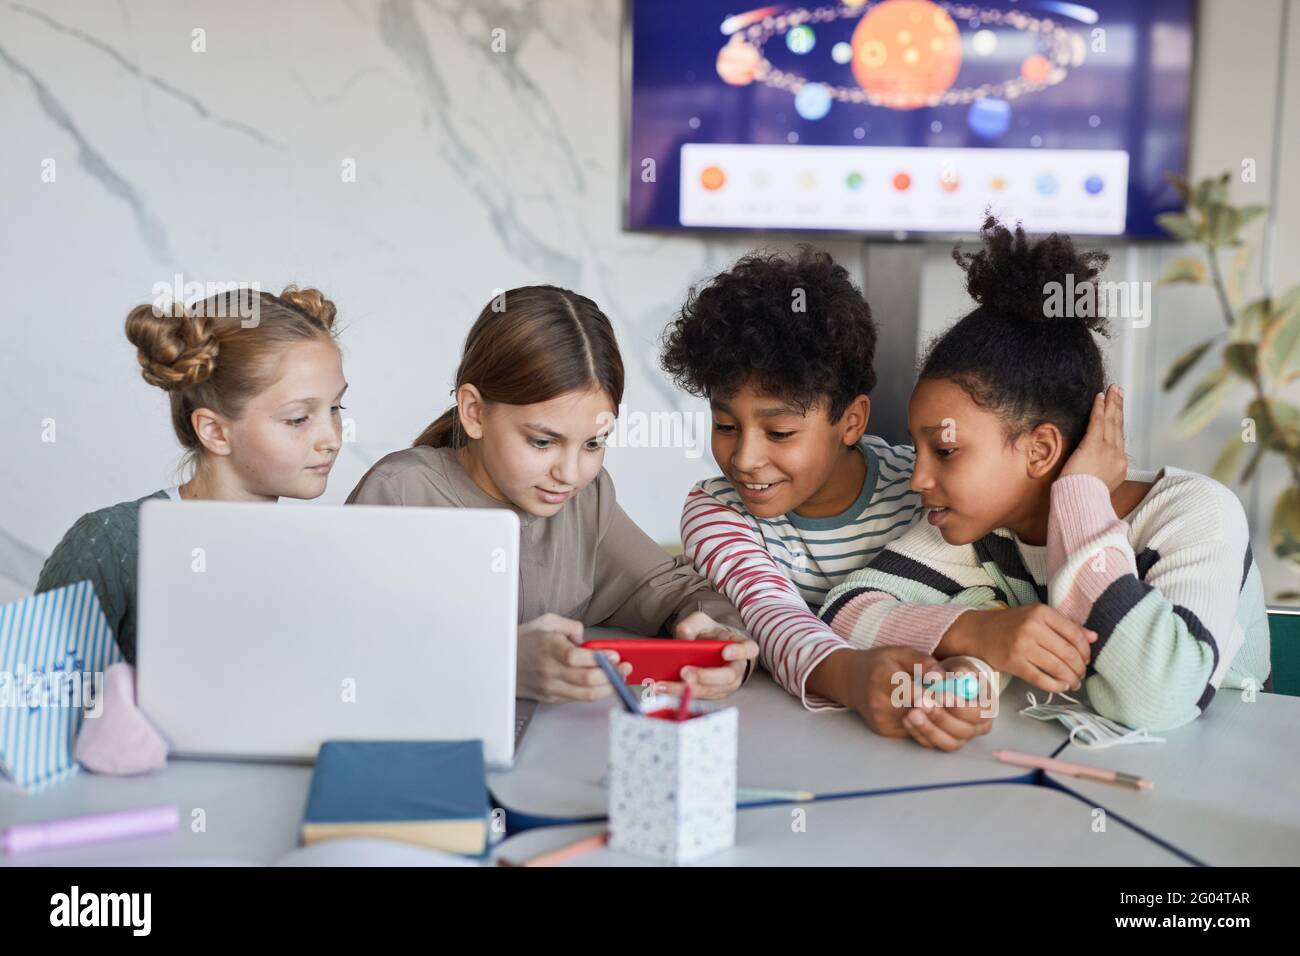 Diverse group of children studying together at table in modern school, copy space Stock Photo